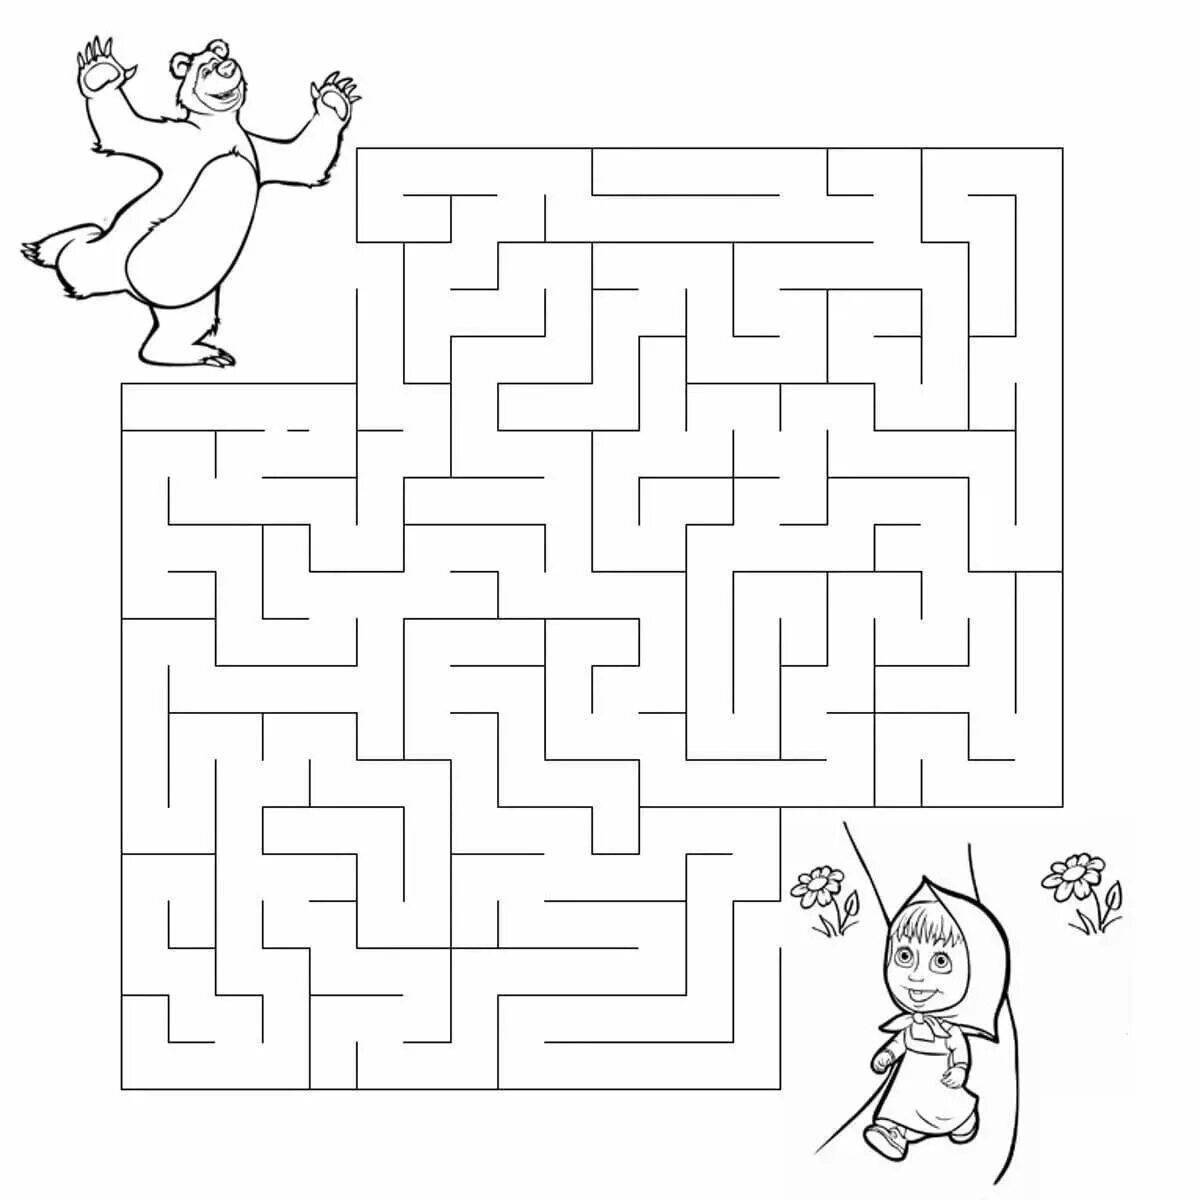 Fun coloring maze for kids 5-6 years old